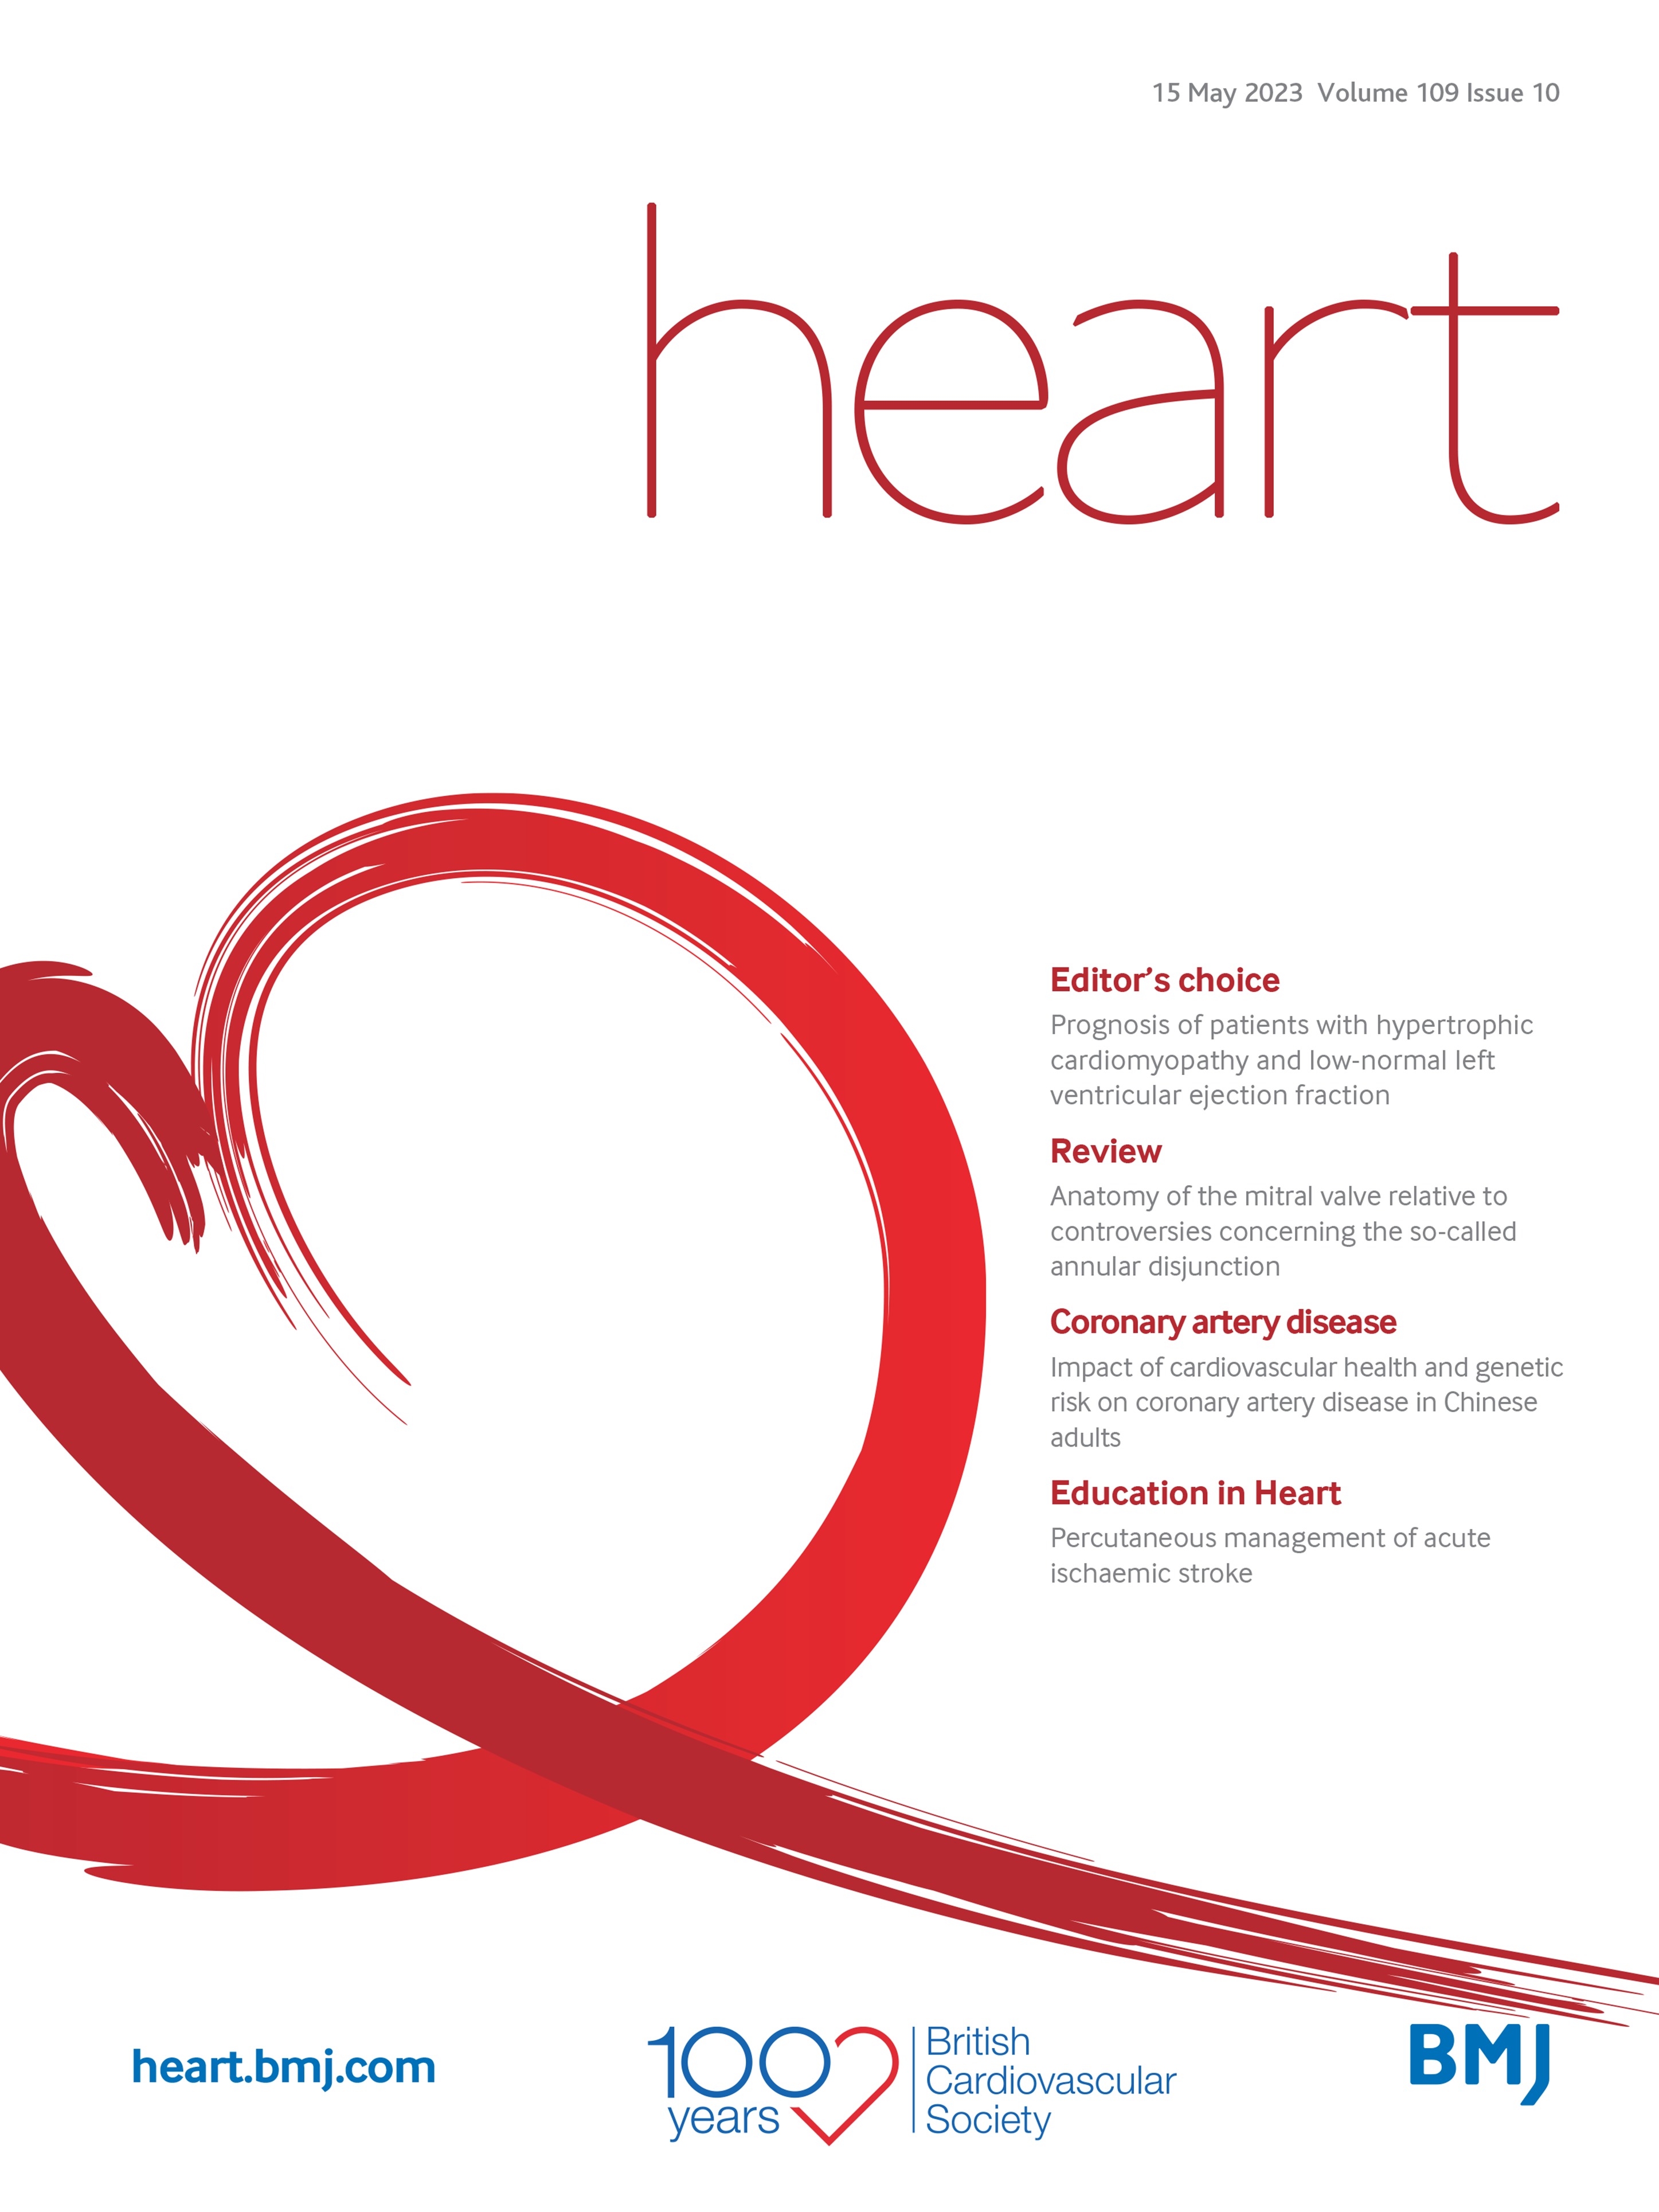 Heartbeat: sudden cardiac death risk in patients with hypertrophic cardiomyopathy